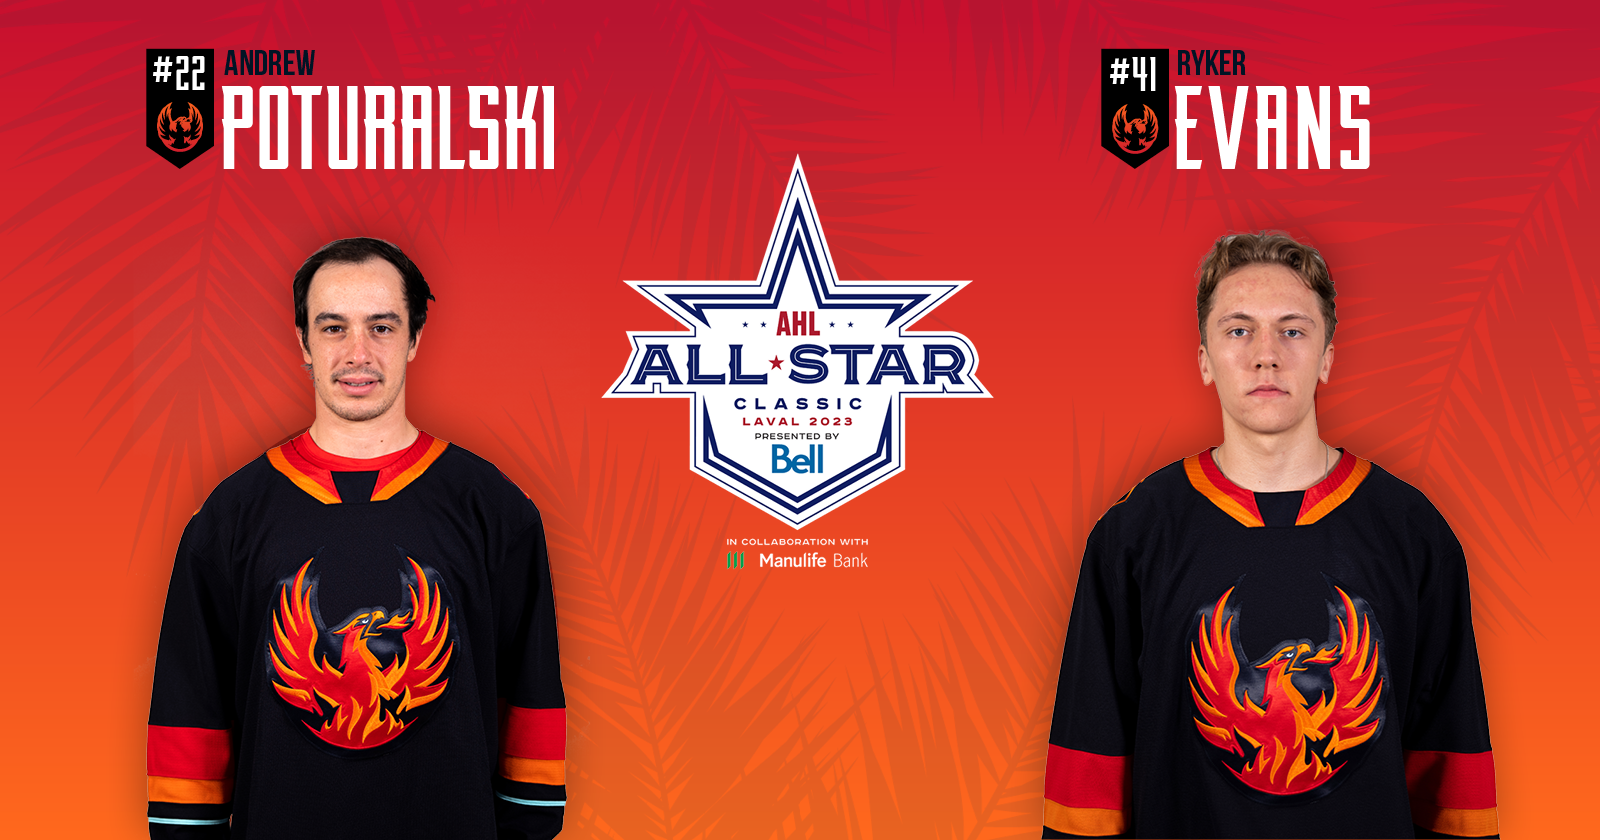 Rosters announced for 2023 AHL All-Star Classic